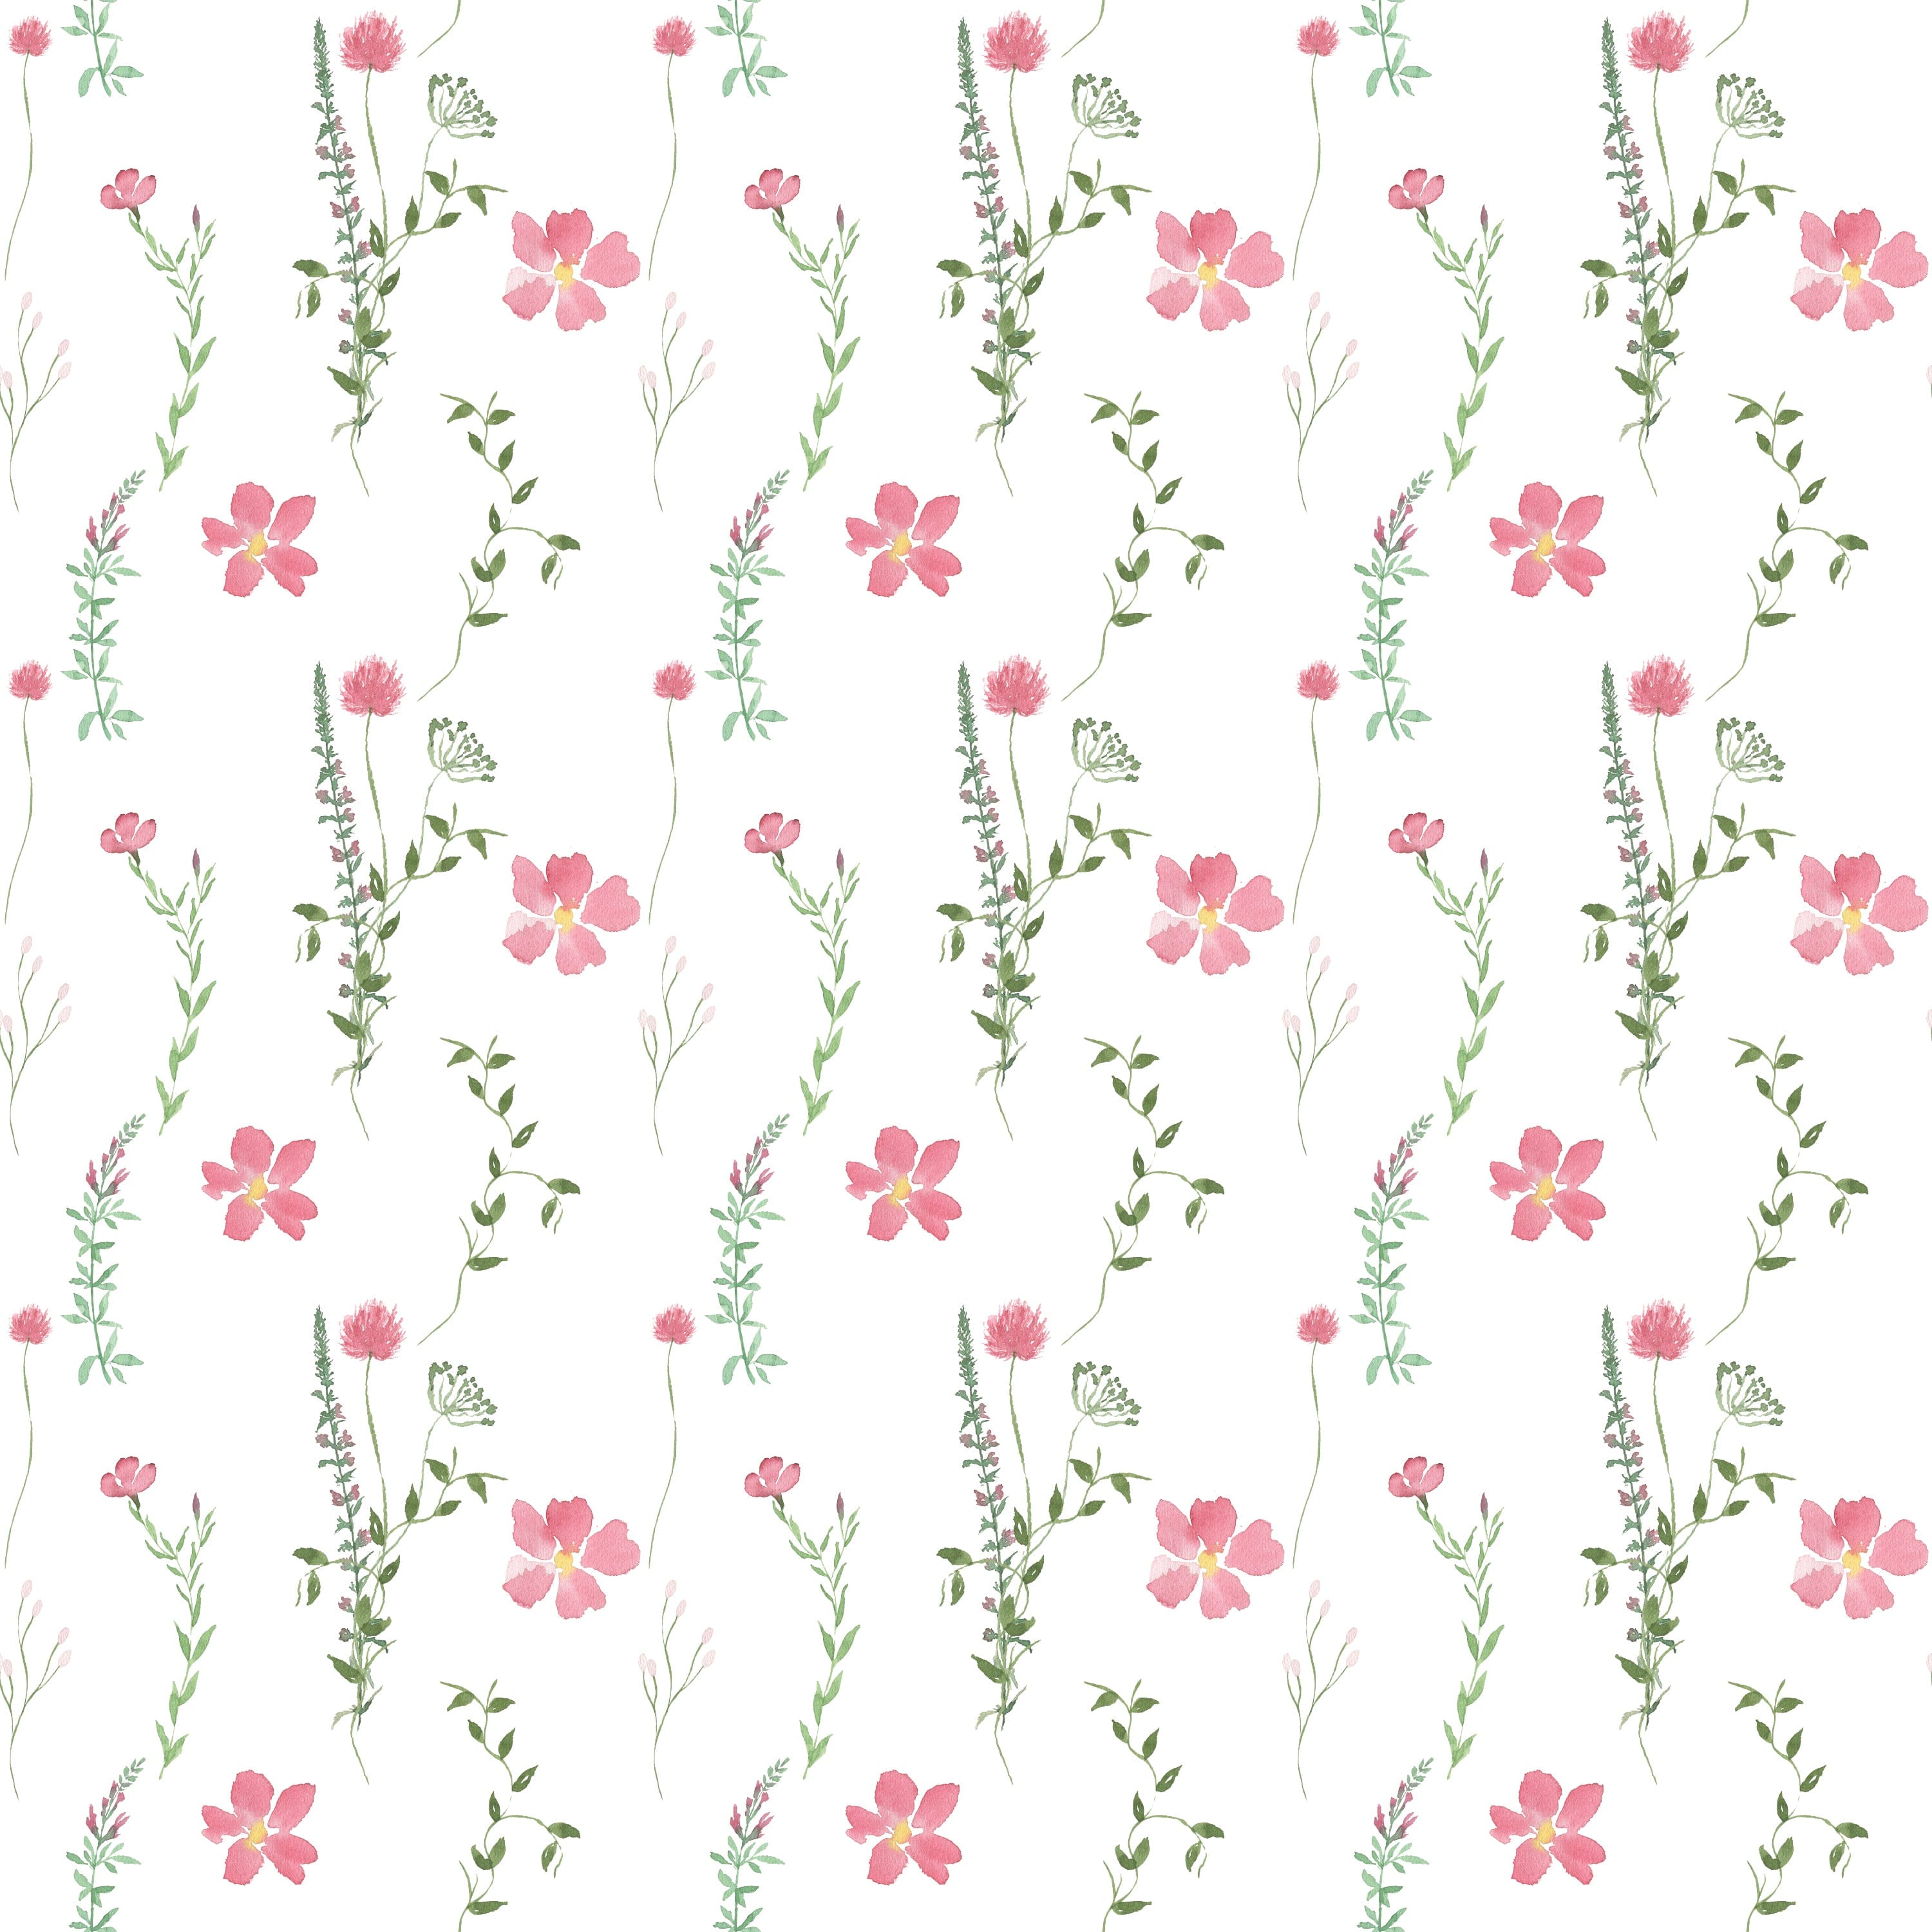 Pattern detail of the Spring Serenity Wallpaper with watercolor-style pink flowers and green foliage on a white background, illustrating the fresh and serene design